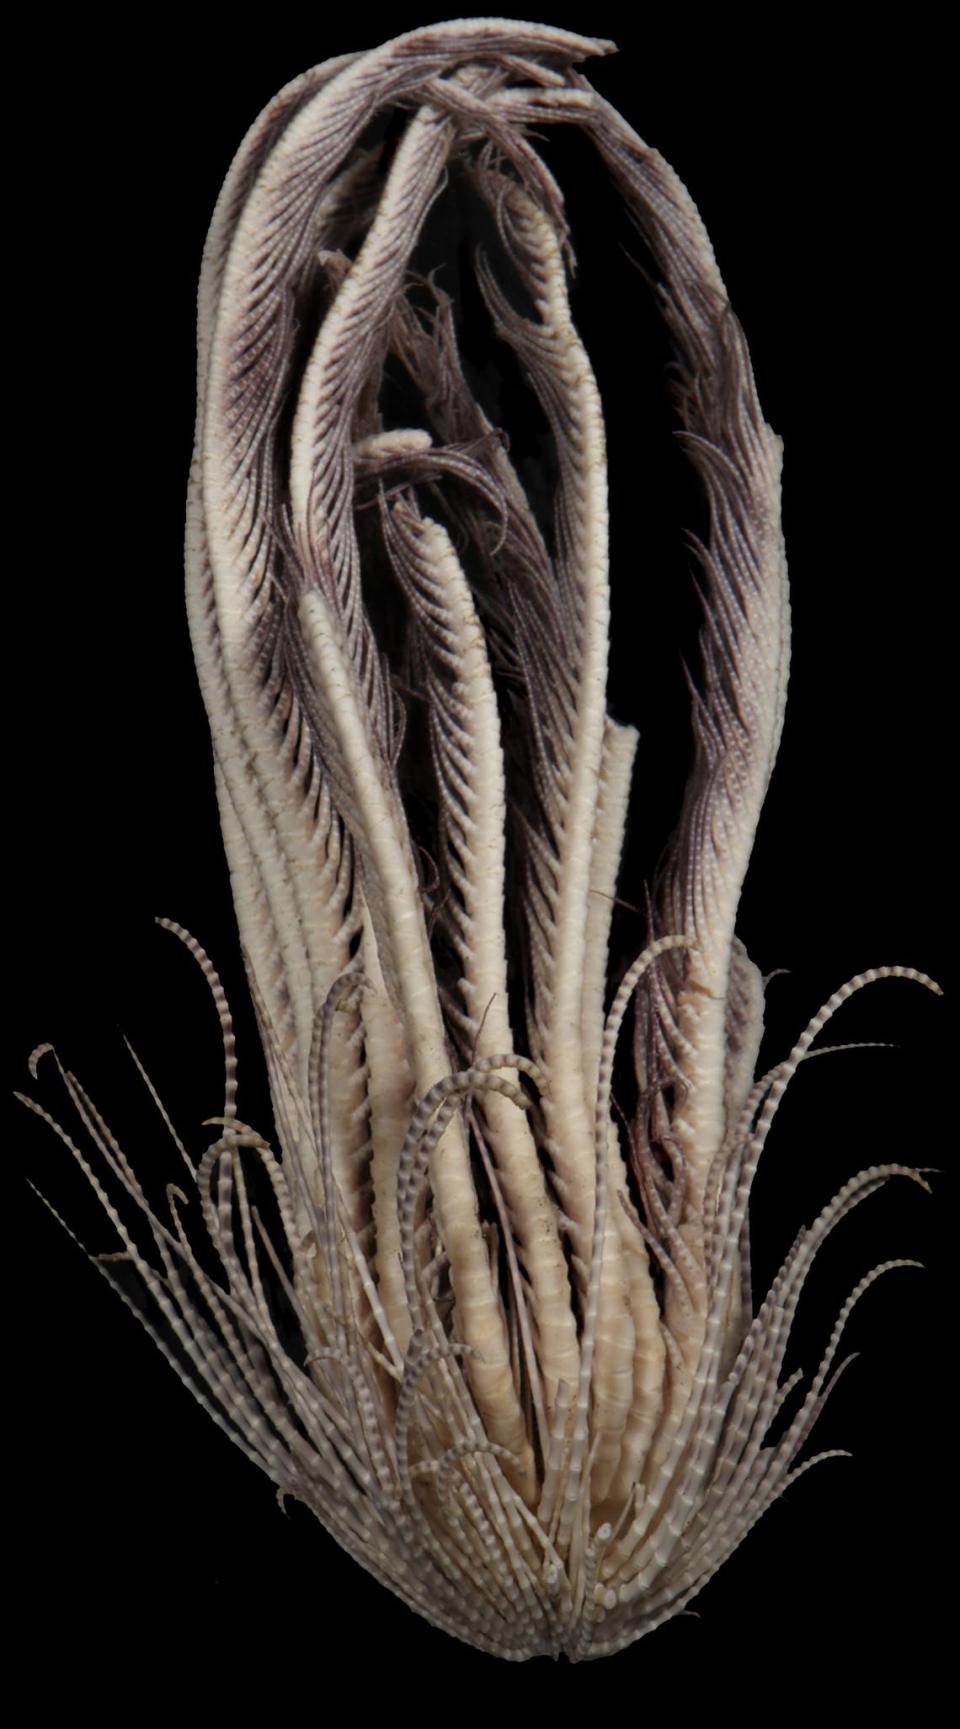 A preserved Promachocrinus fragarius, or Antarctic strawberry feather star, seen from the side.